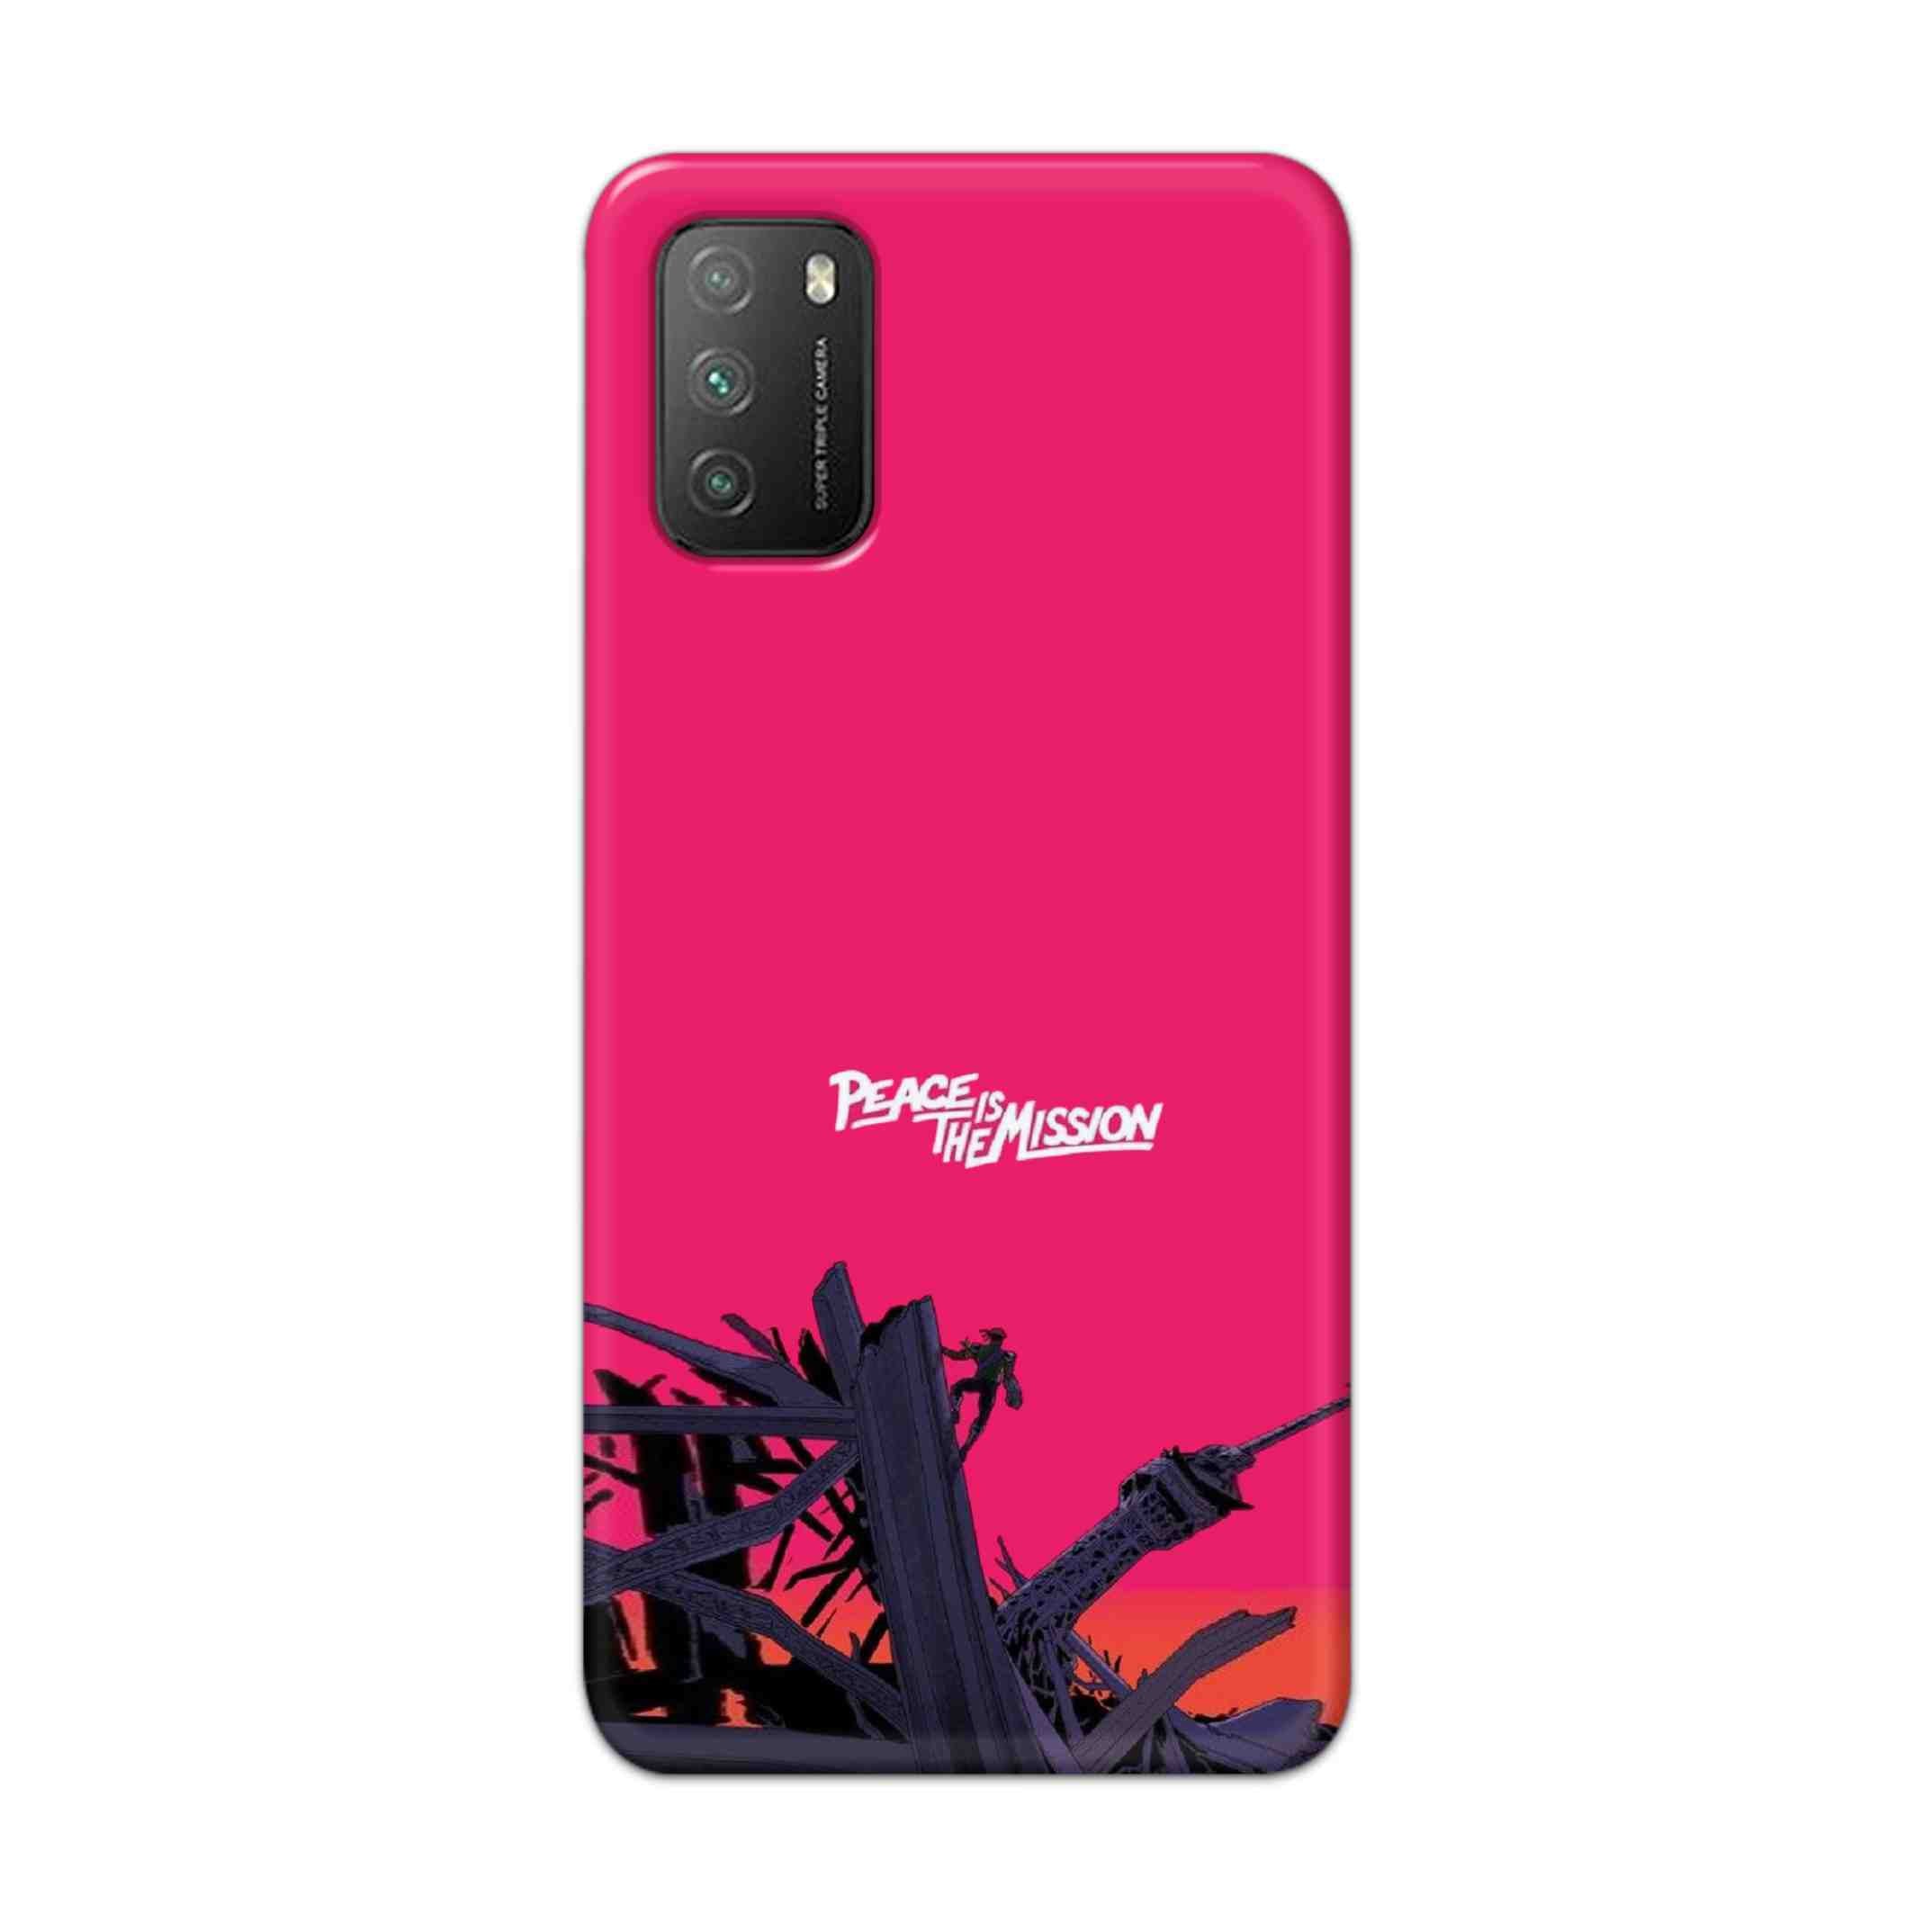 Buy Peace Is The Mission Hard Back Mobile Phone Case Cover For Poco M3 Online